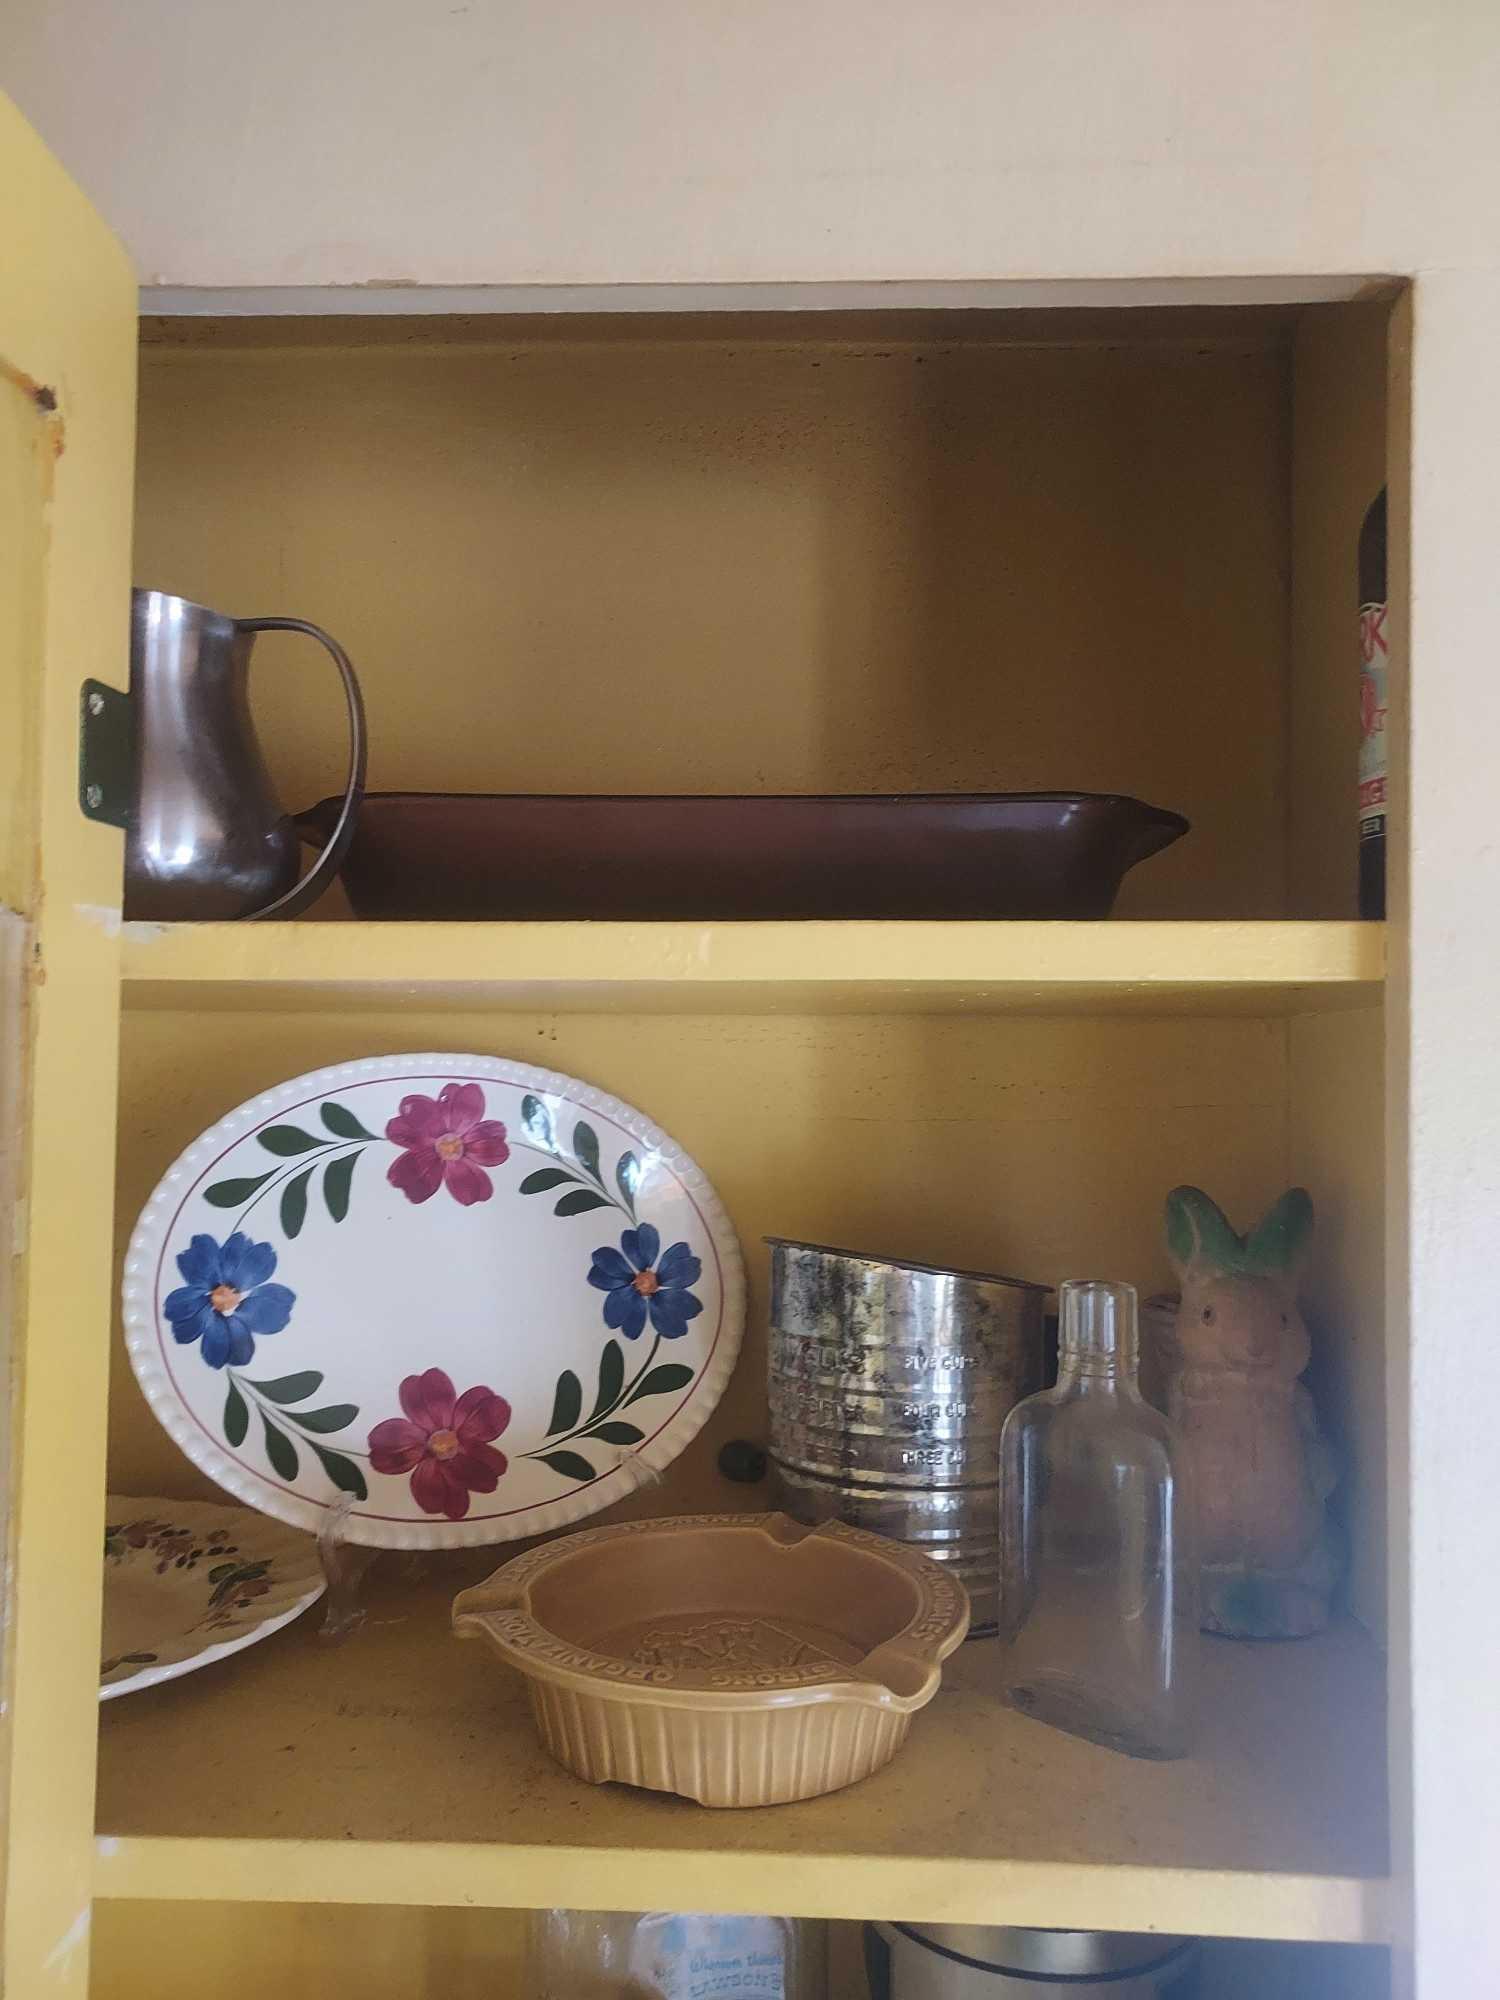 Contents of Kitchen Cabinets & Drawers